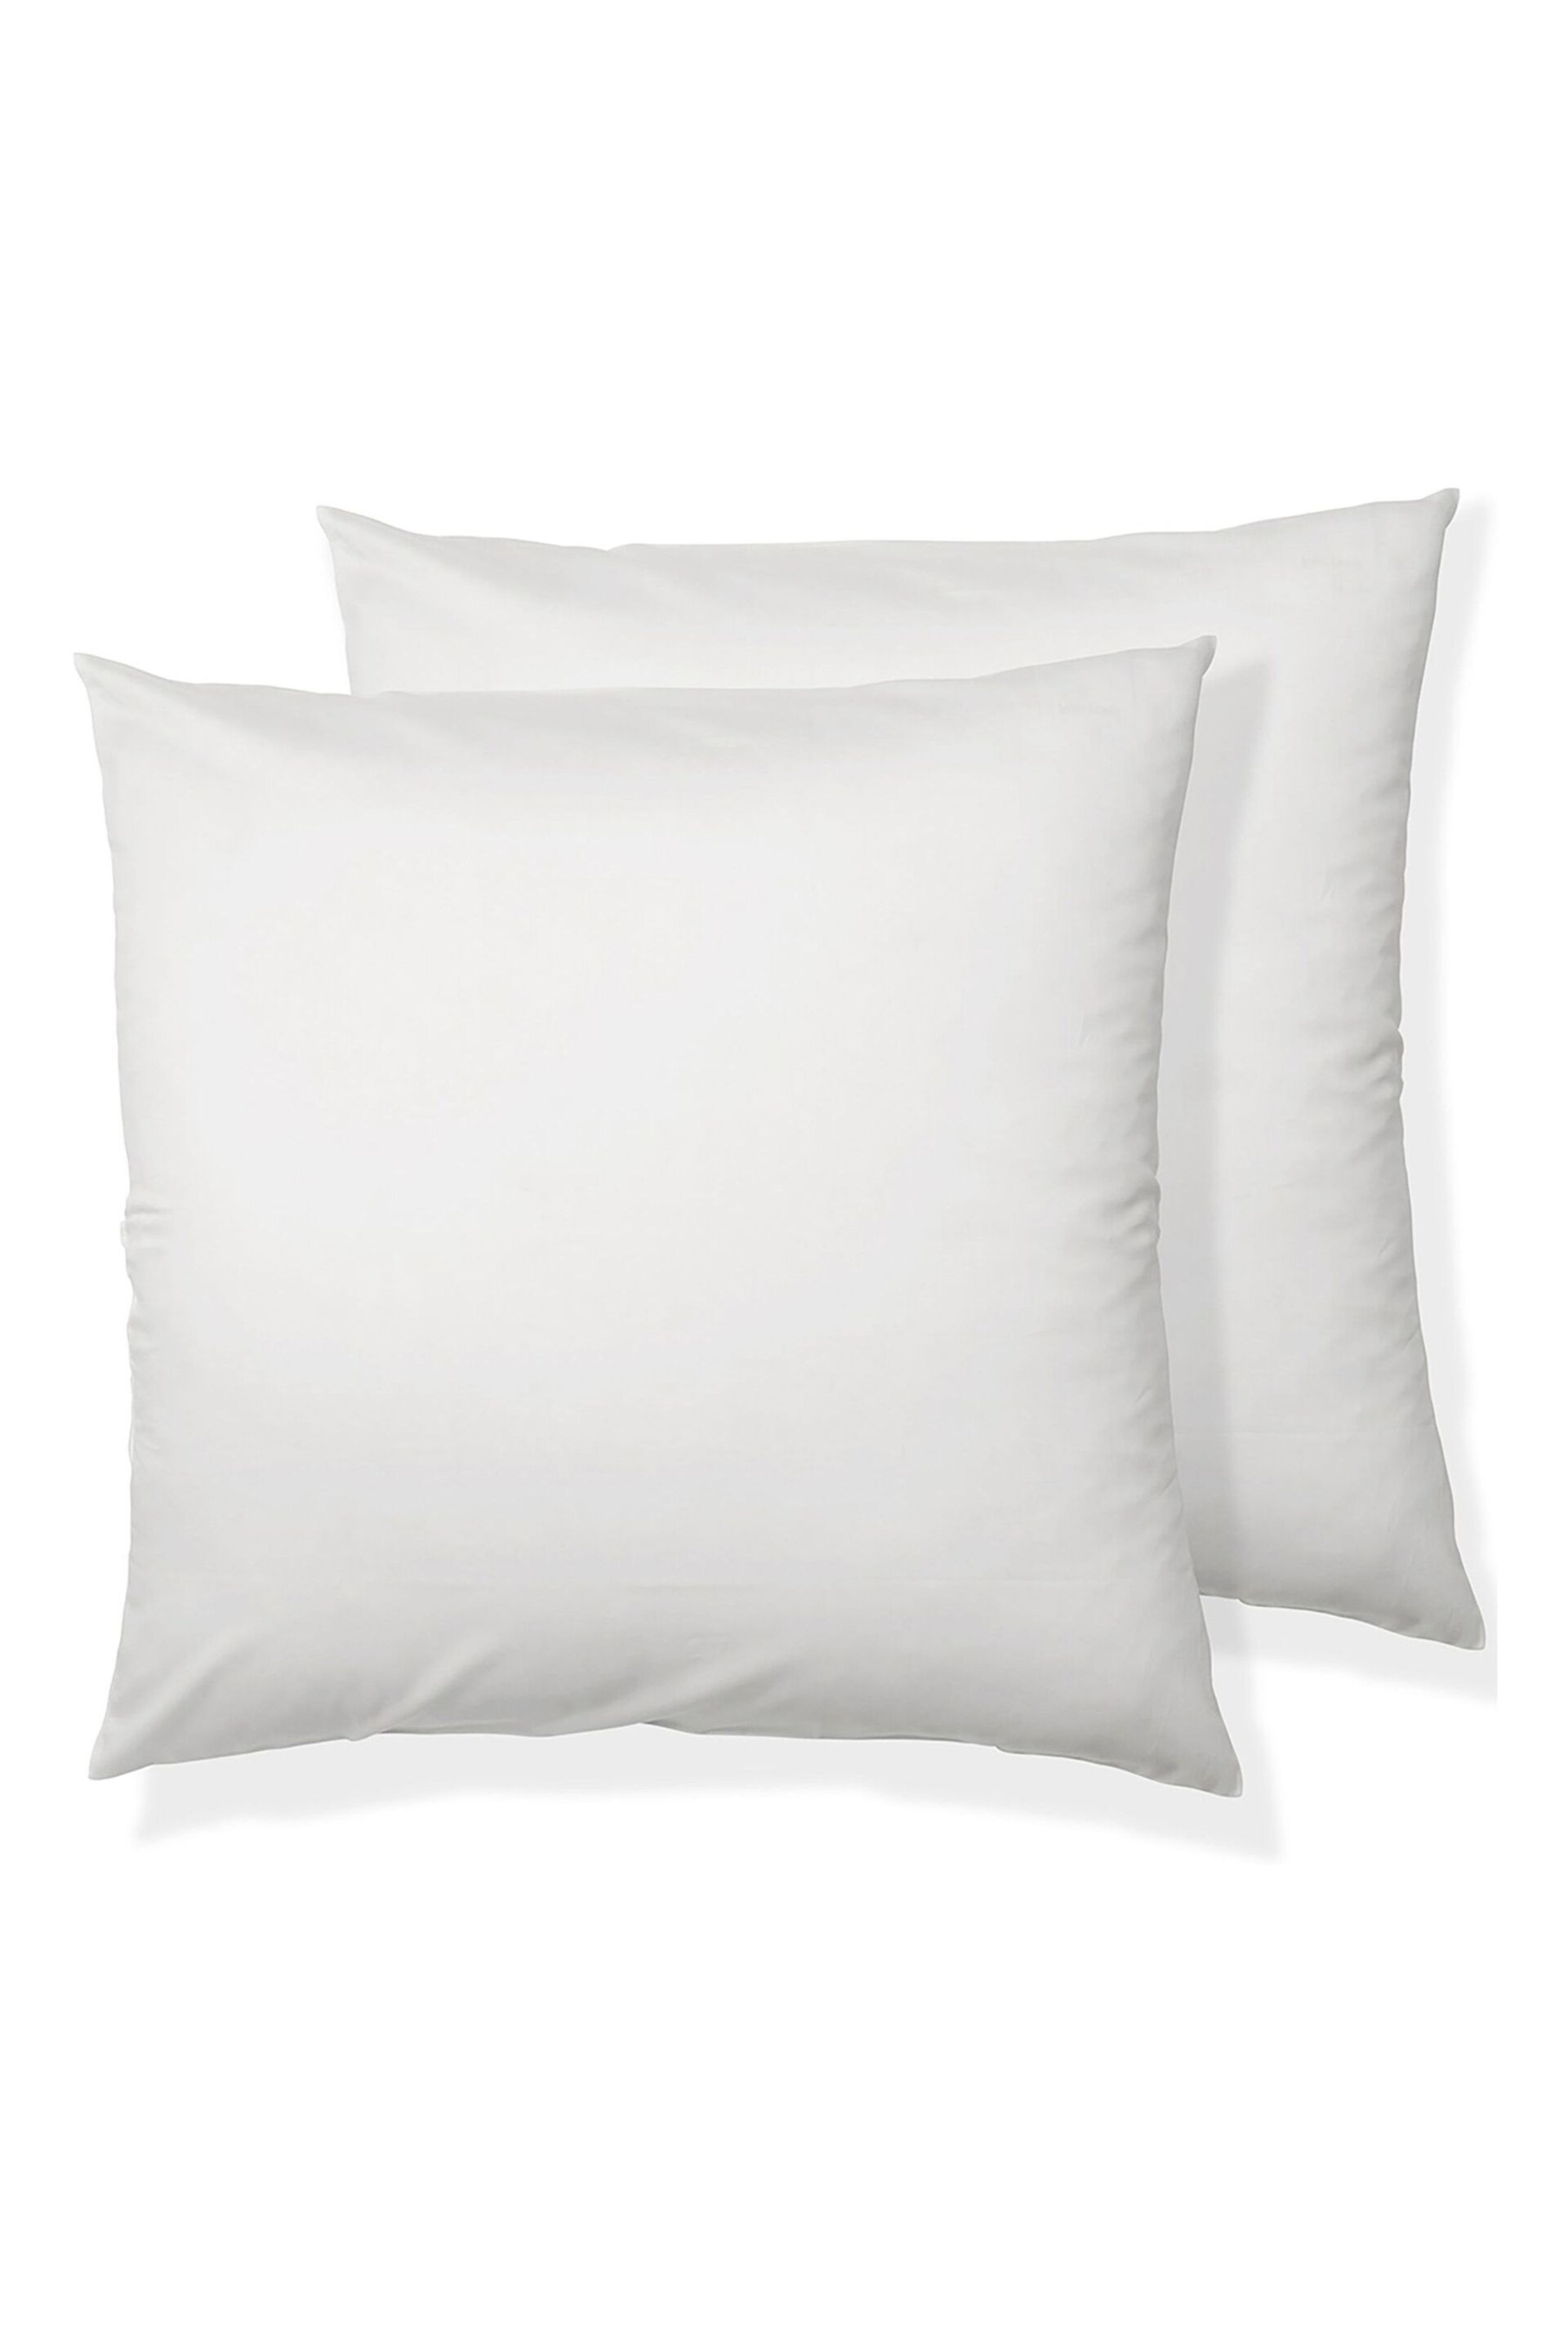 Bedfolk Set of 2 White Luxe Cotton Square Pillowcases - Image 3 of 3